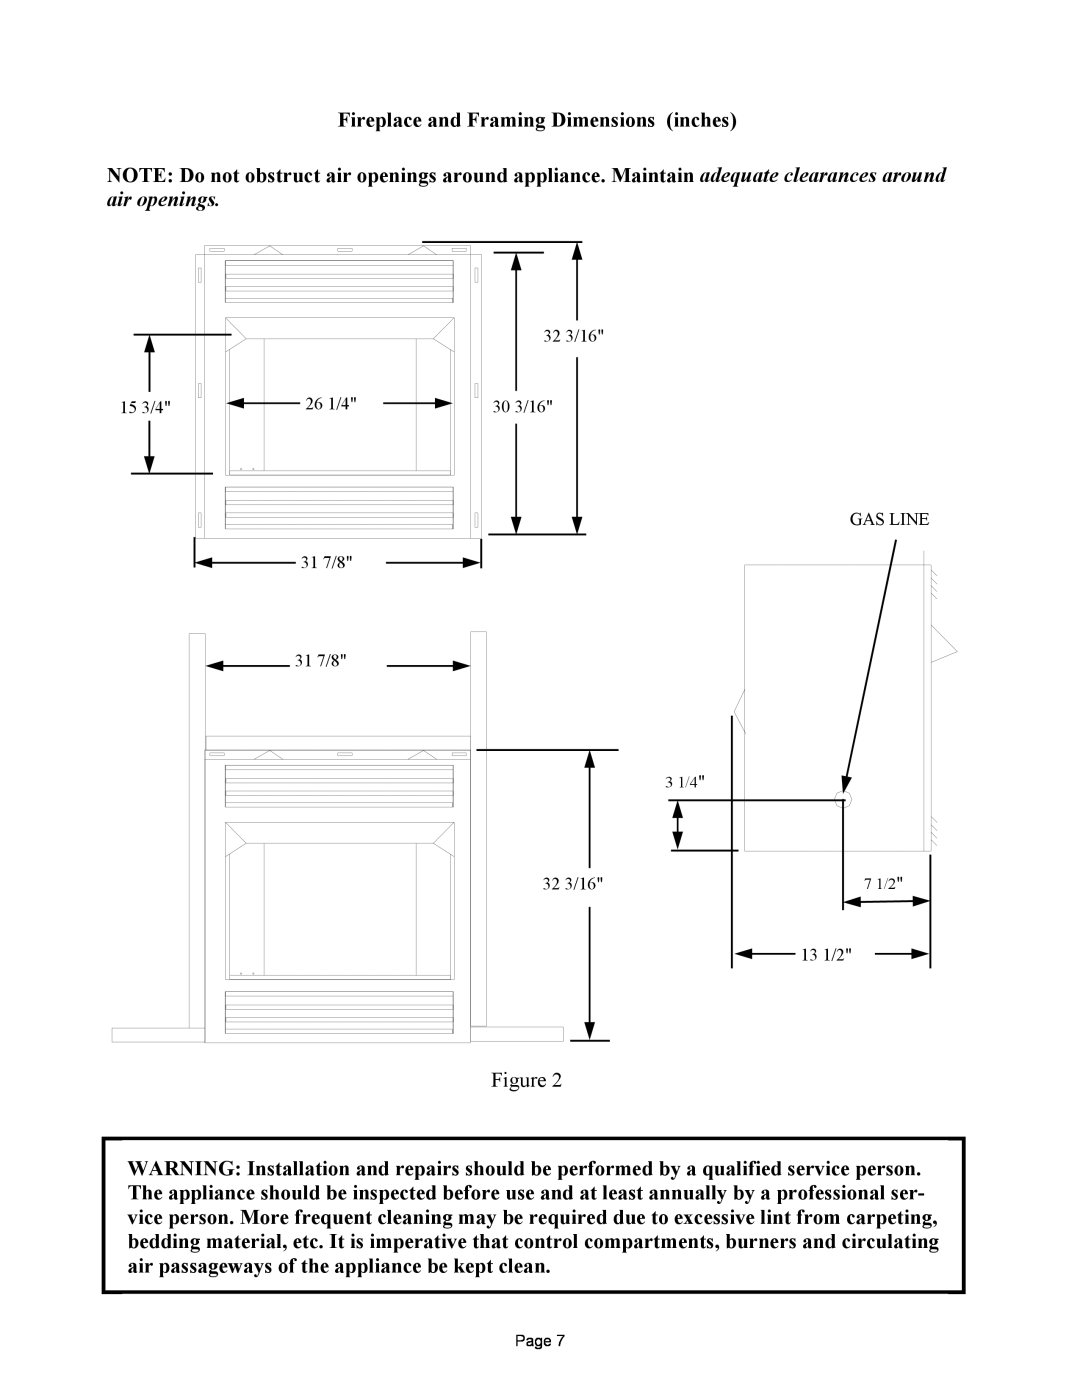 New Buck Corporation MODEL FP-327-ZC manual Fireplace and Framing Dimensions inches, 3 1/4, 7 1/2, Page 